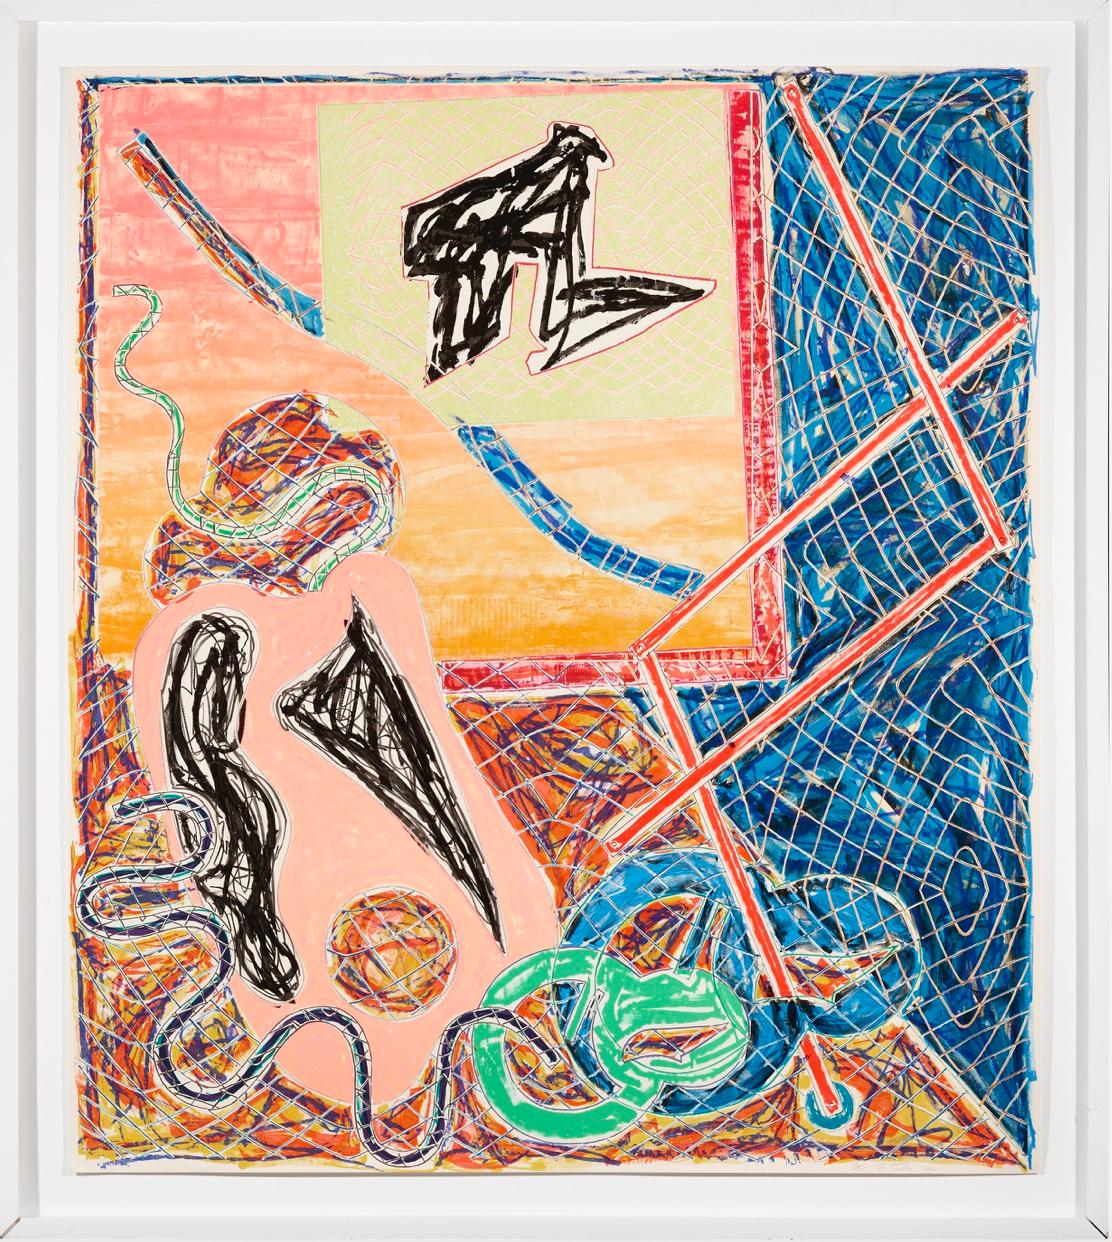 FRANK STELLA (1936-Present)

Frank Stella's 'Shards I' is a 1982 screenprint and lithograph in colors on Arches paper. It is signed, dated and numbered to lower end ‘56/100 F. Stella 82’. This piece is number 56 from the edition of 100 published by